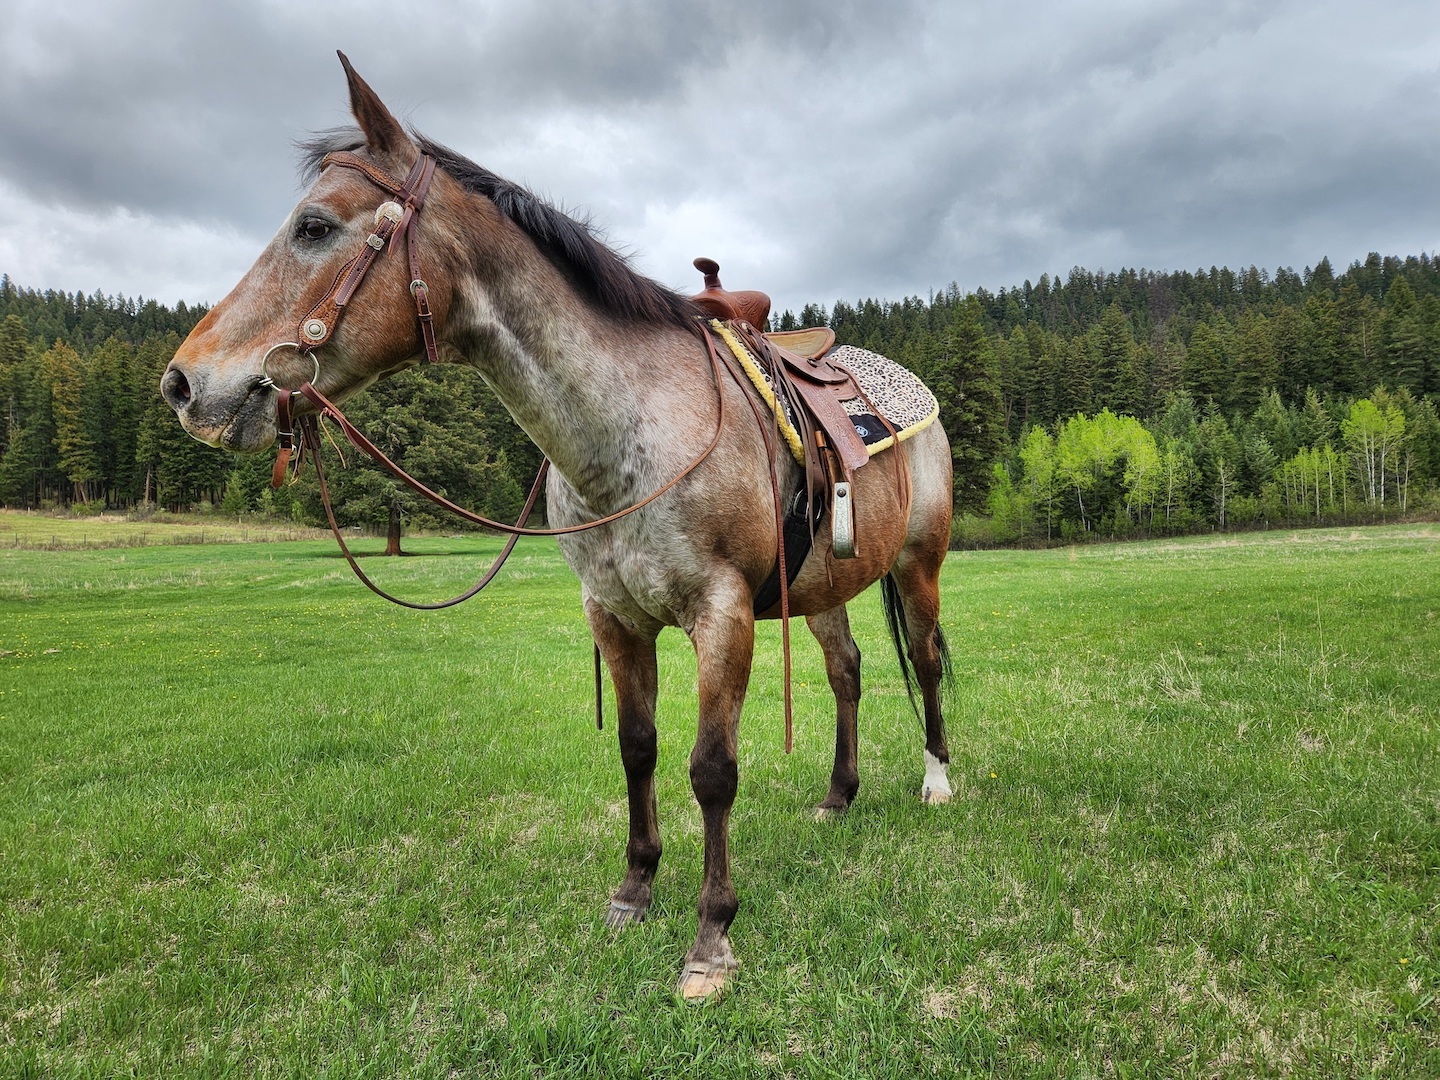 photo of an appaloosa gelding in western tack, looking out into a field under an overcast sky